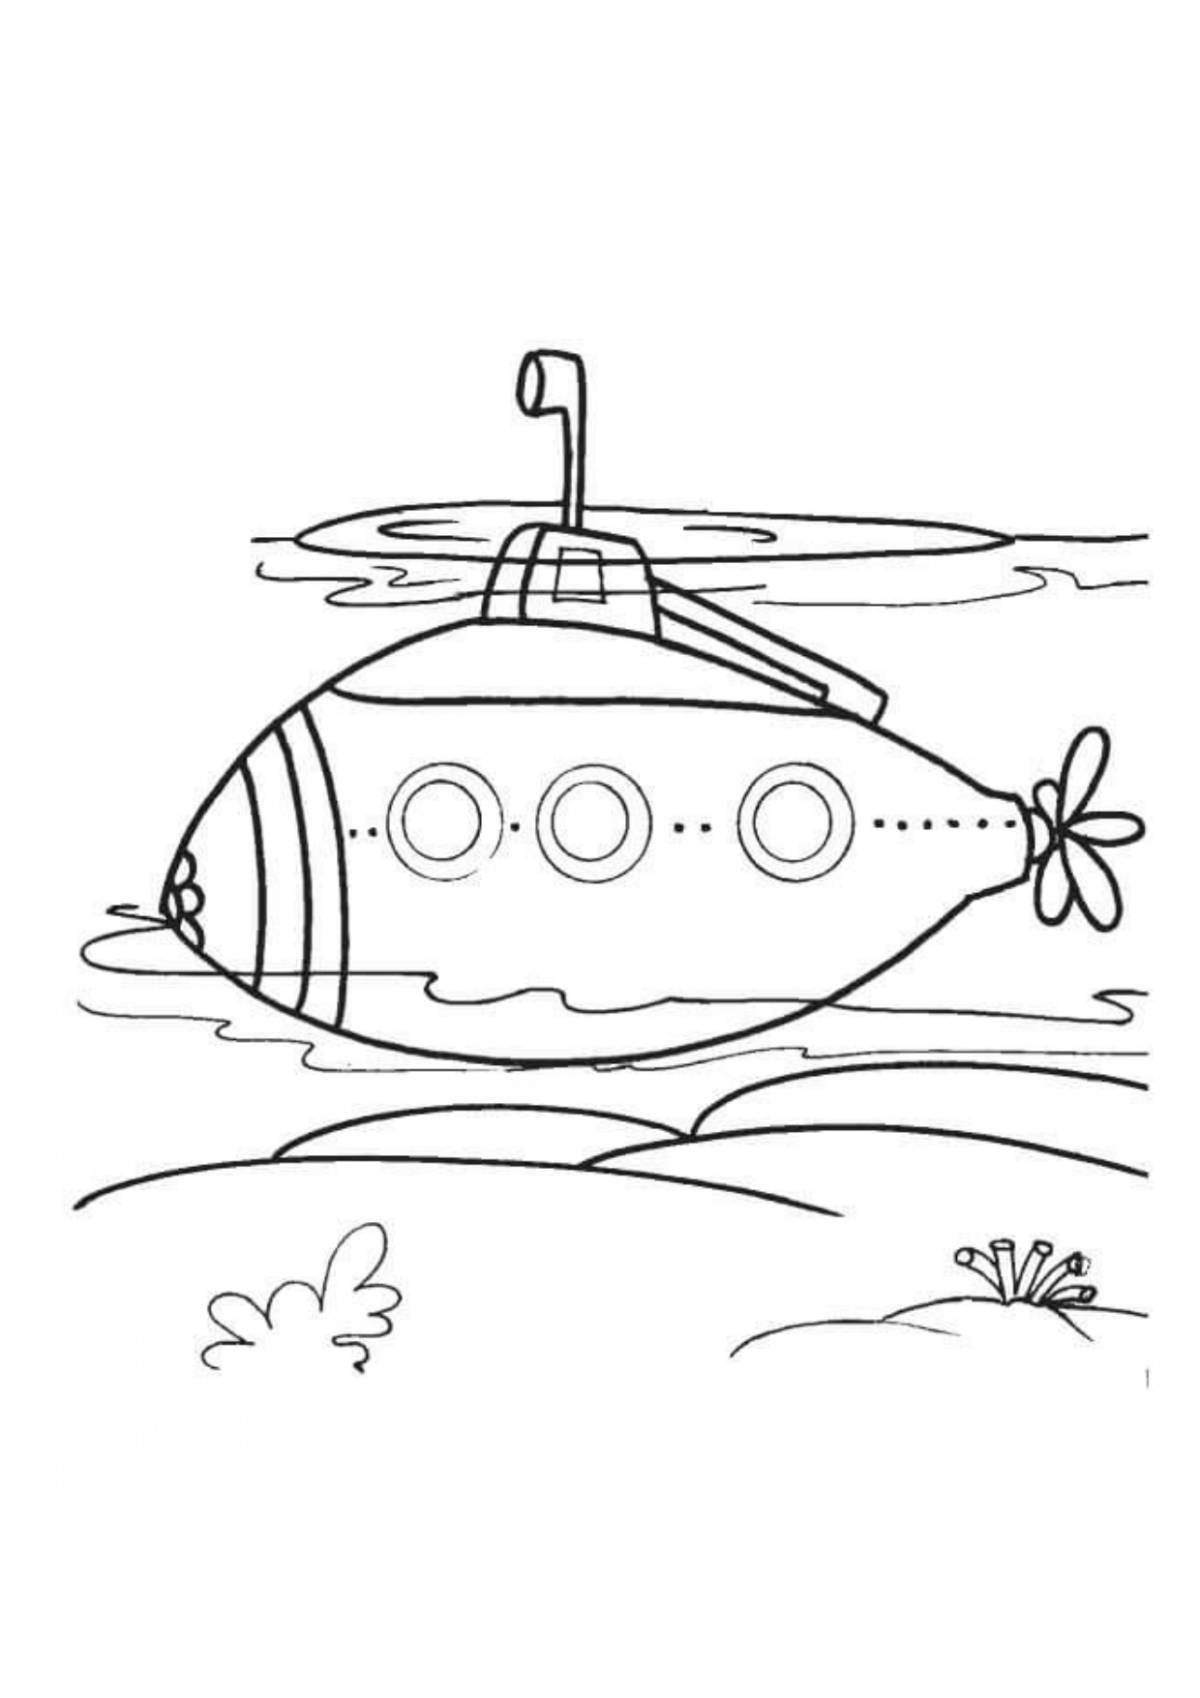 Fun submarine coloring book for kids